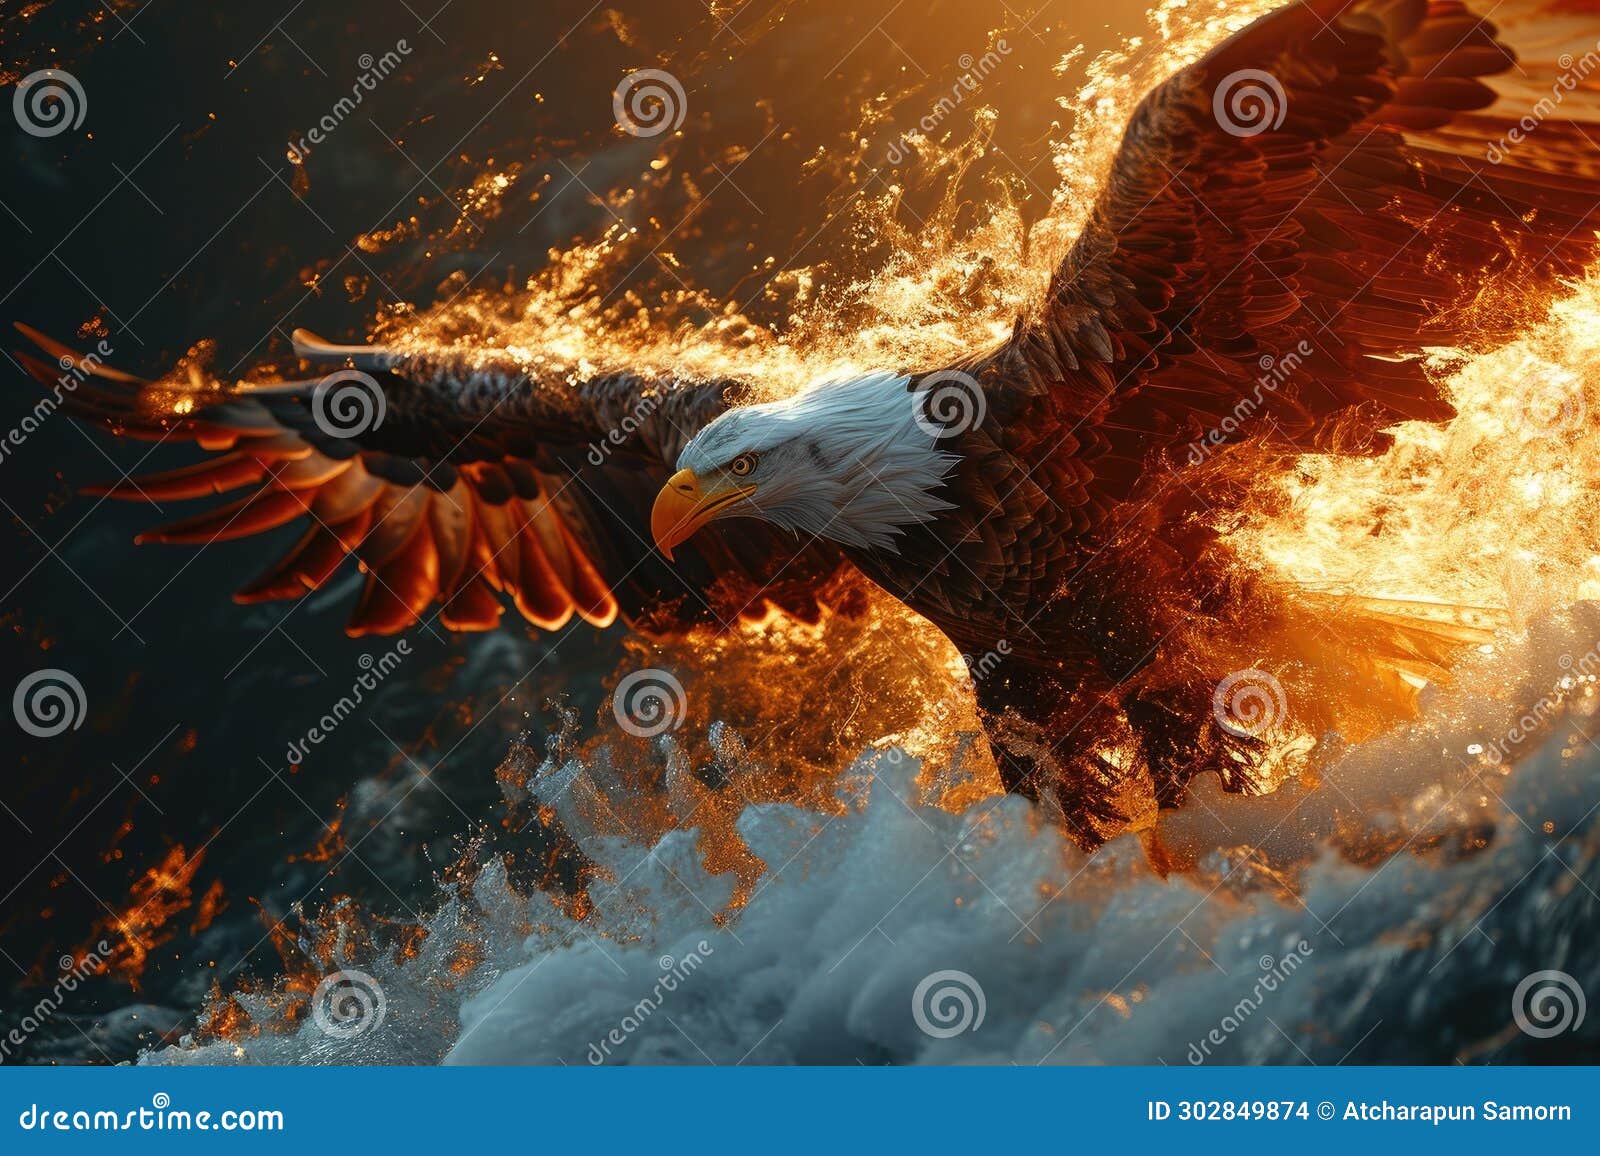 Red phoenix bird icon with fire wings and flaming feathers. Vector fenix  firebird, red fire eagle, falcon or hawk flying with raised wings. Fantasy  phoenix bird silhouettes set for tattoo or heraldry